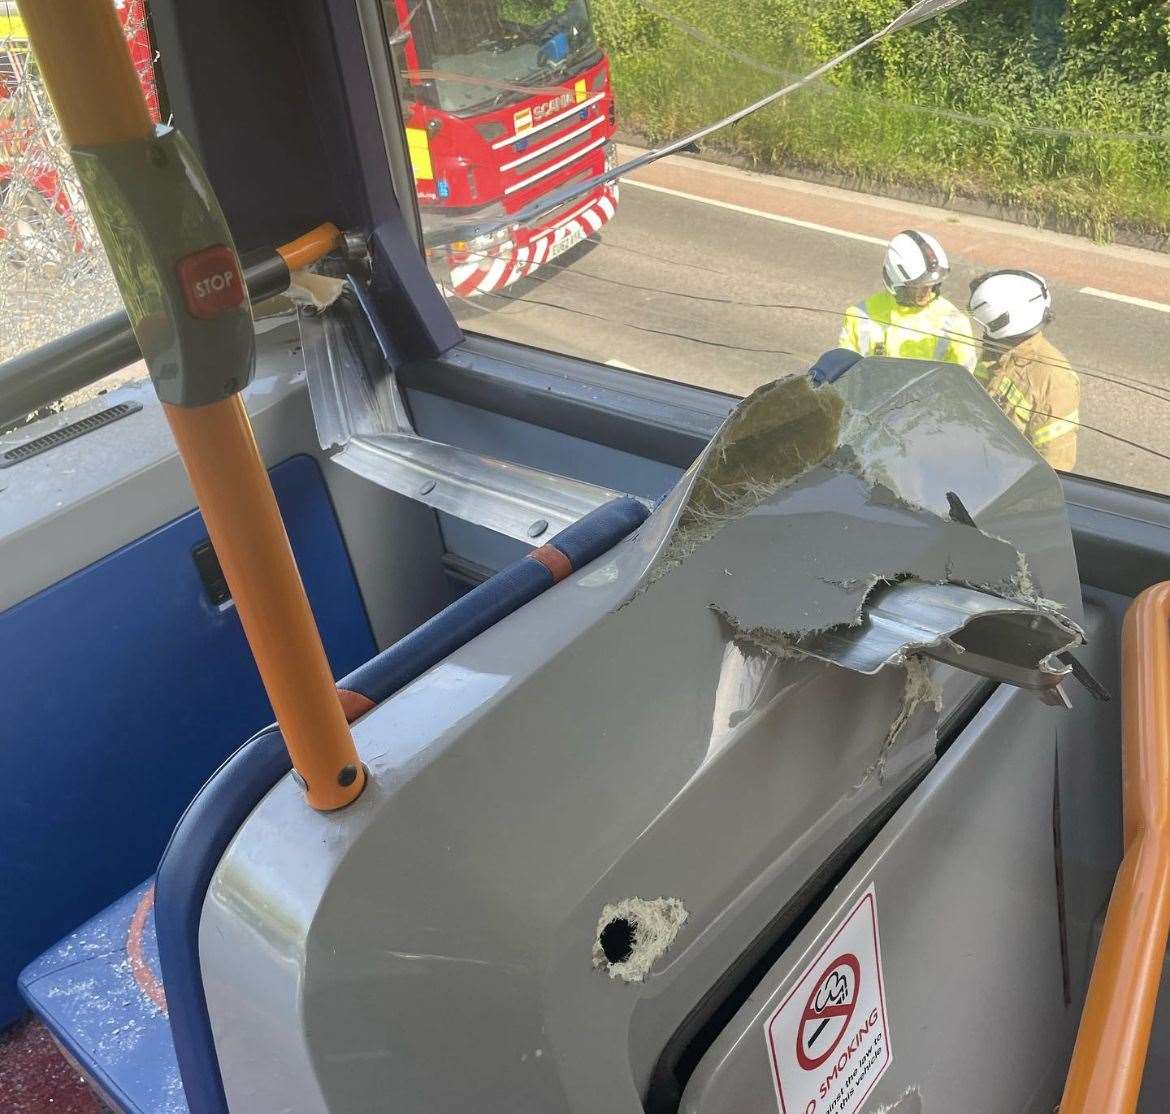 The metal strut which impaled a chair on a Stagecoach bus in a crash in Sturry Road, Canterbury. Picture: Ellie Joels